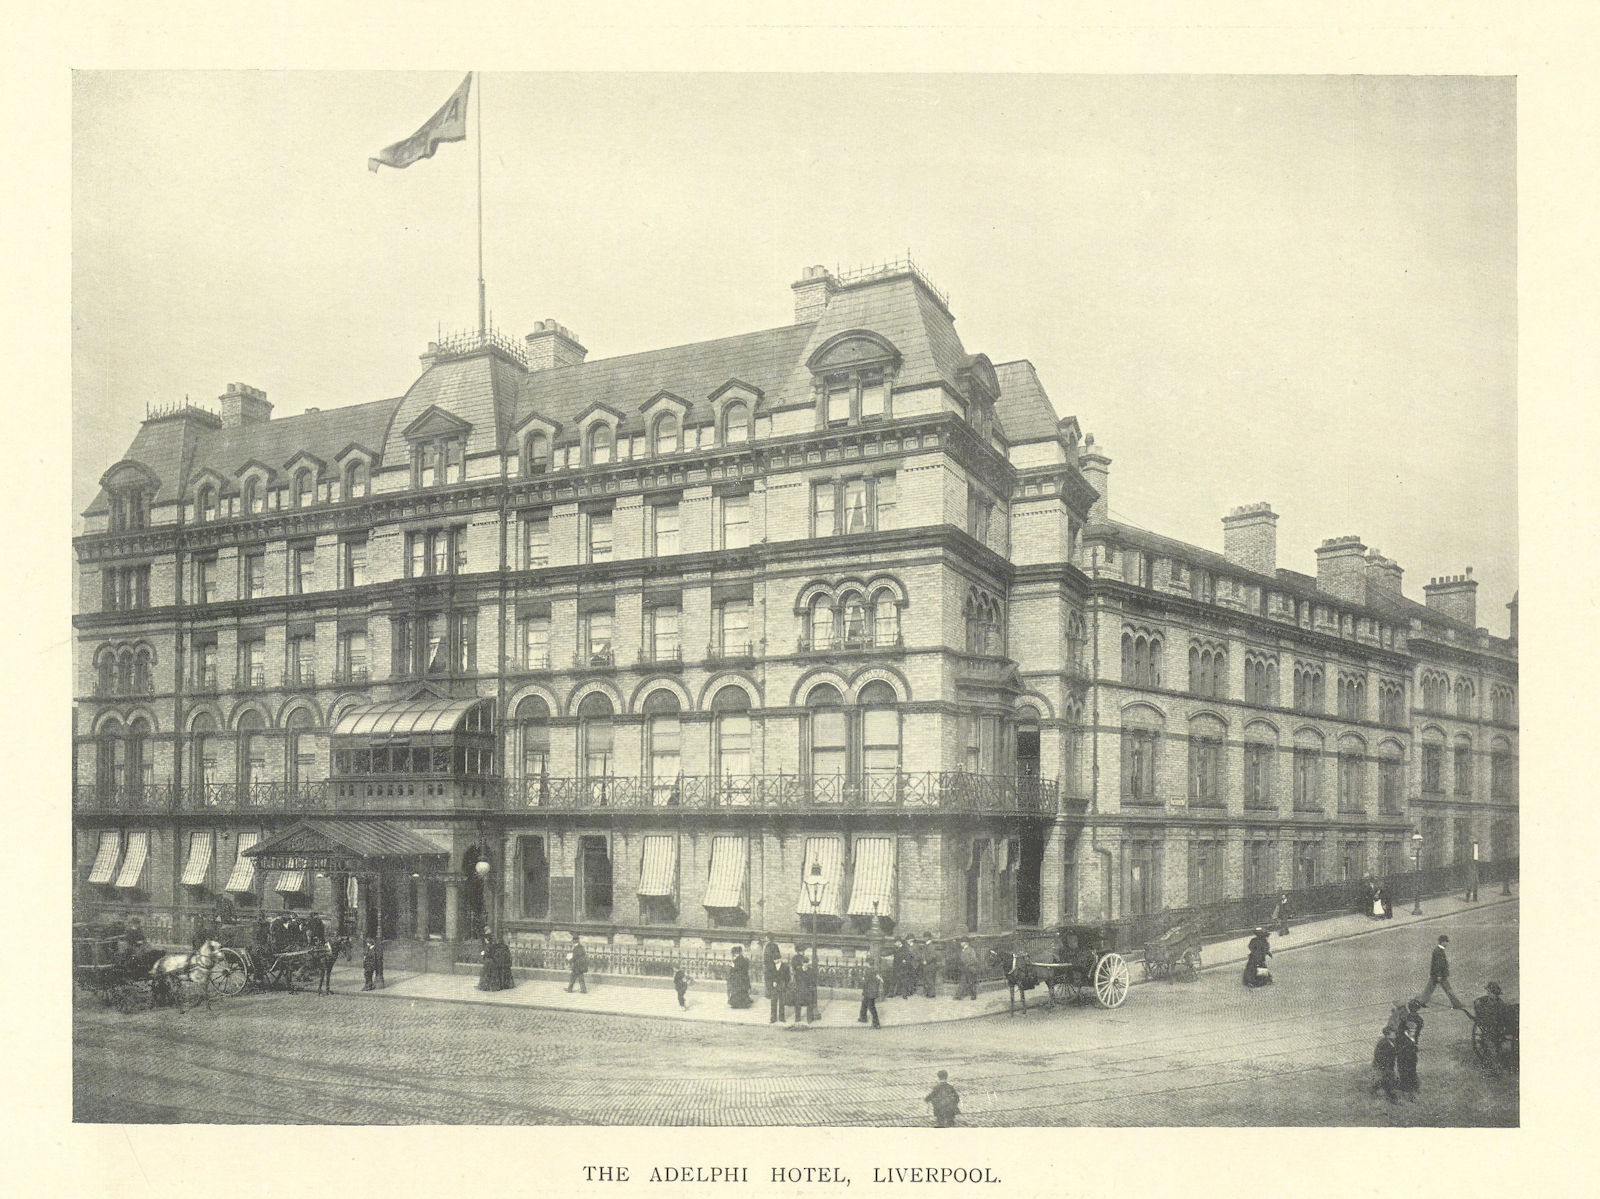 Associate Product The Adelphi Hotel, Liverpool 1903 old antique vintage print picture